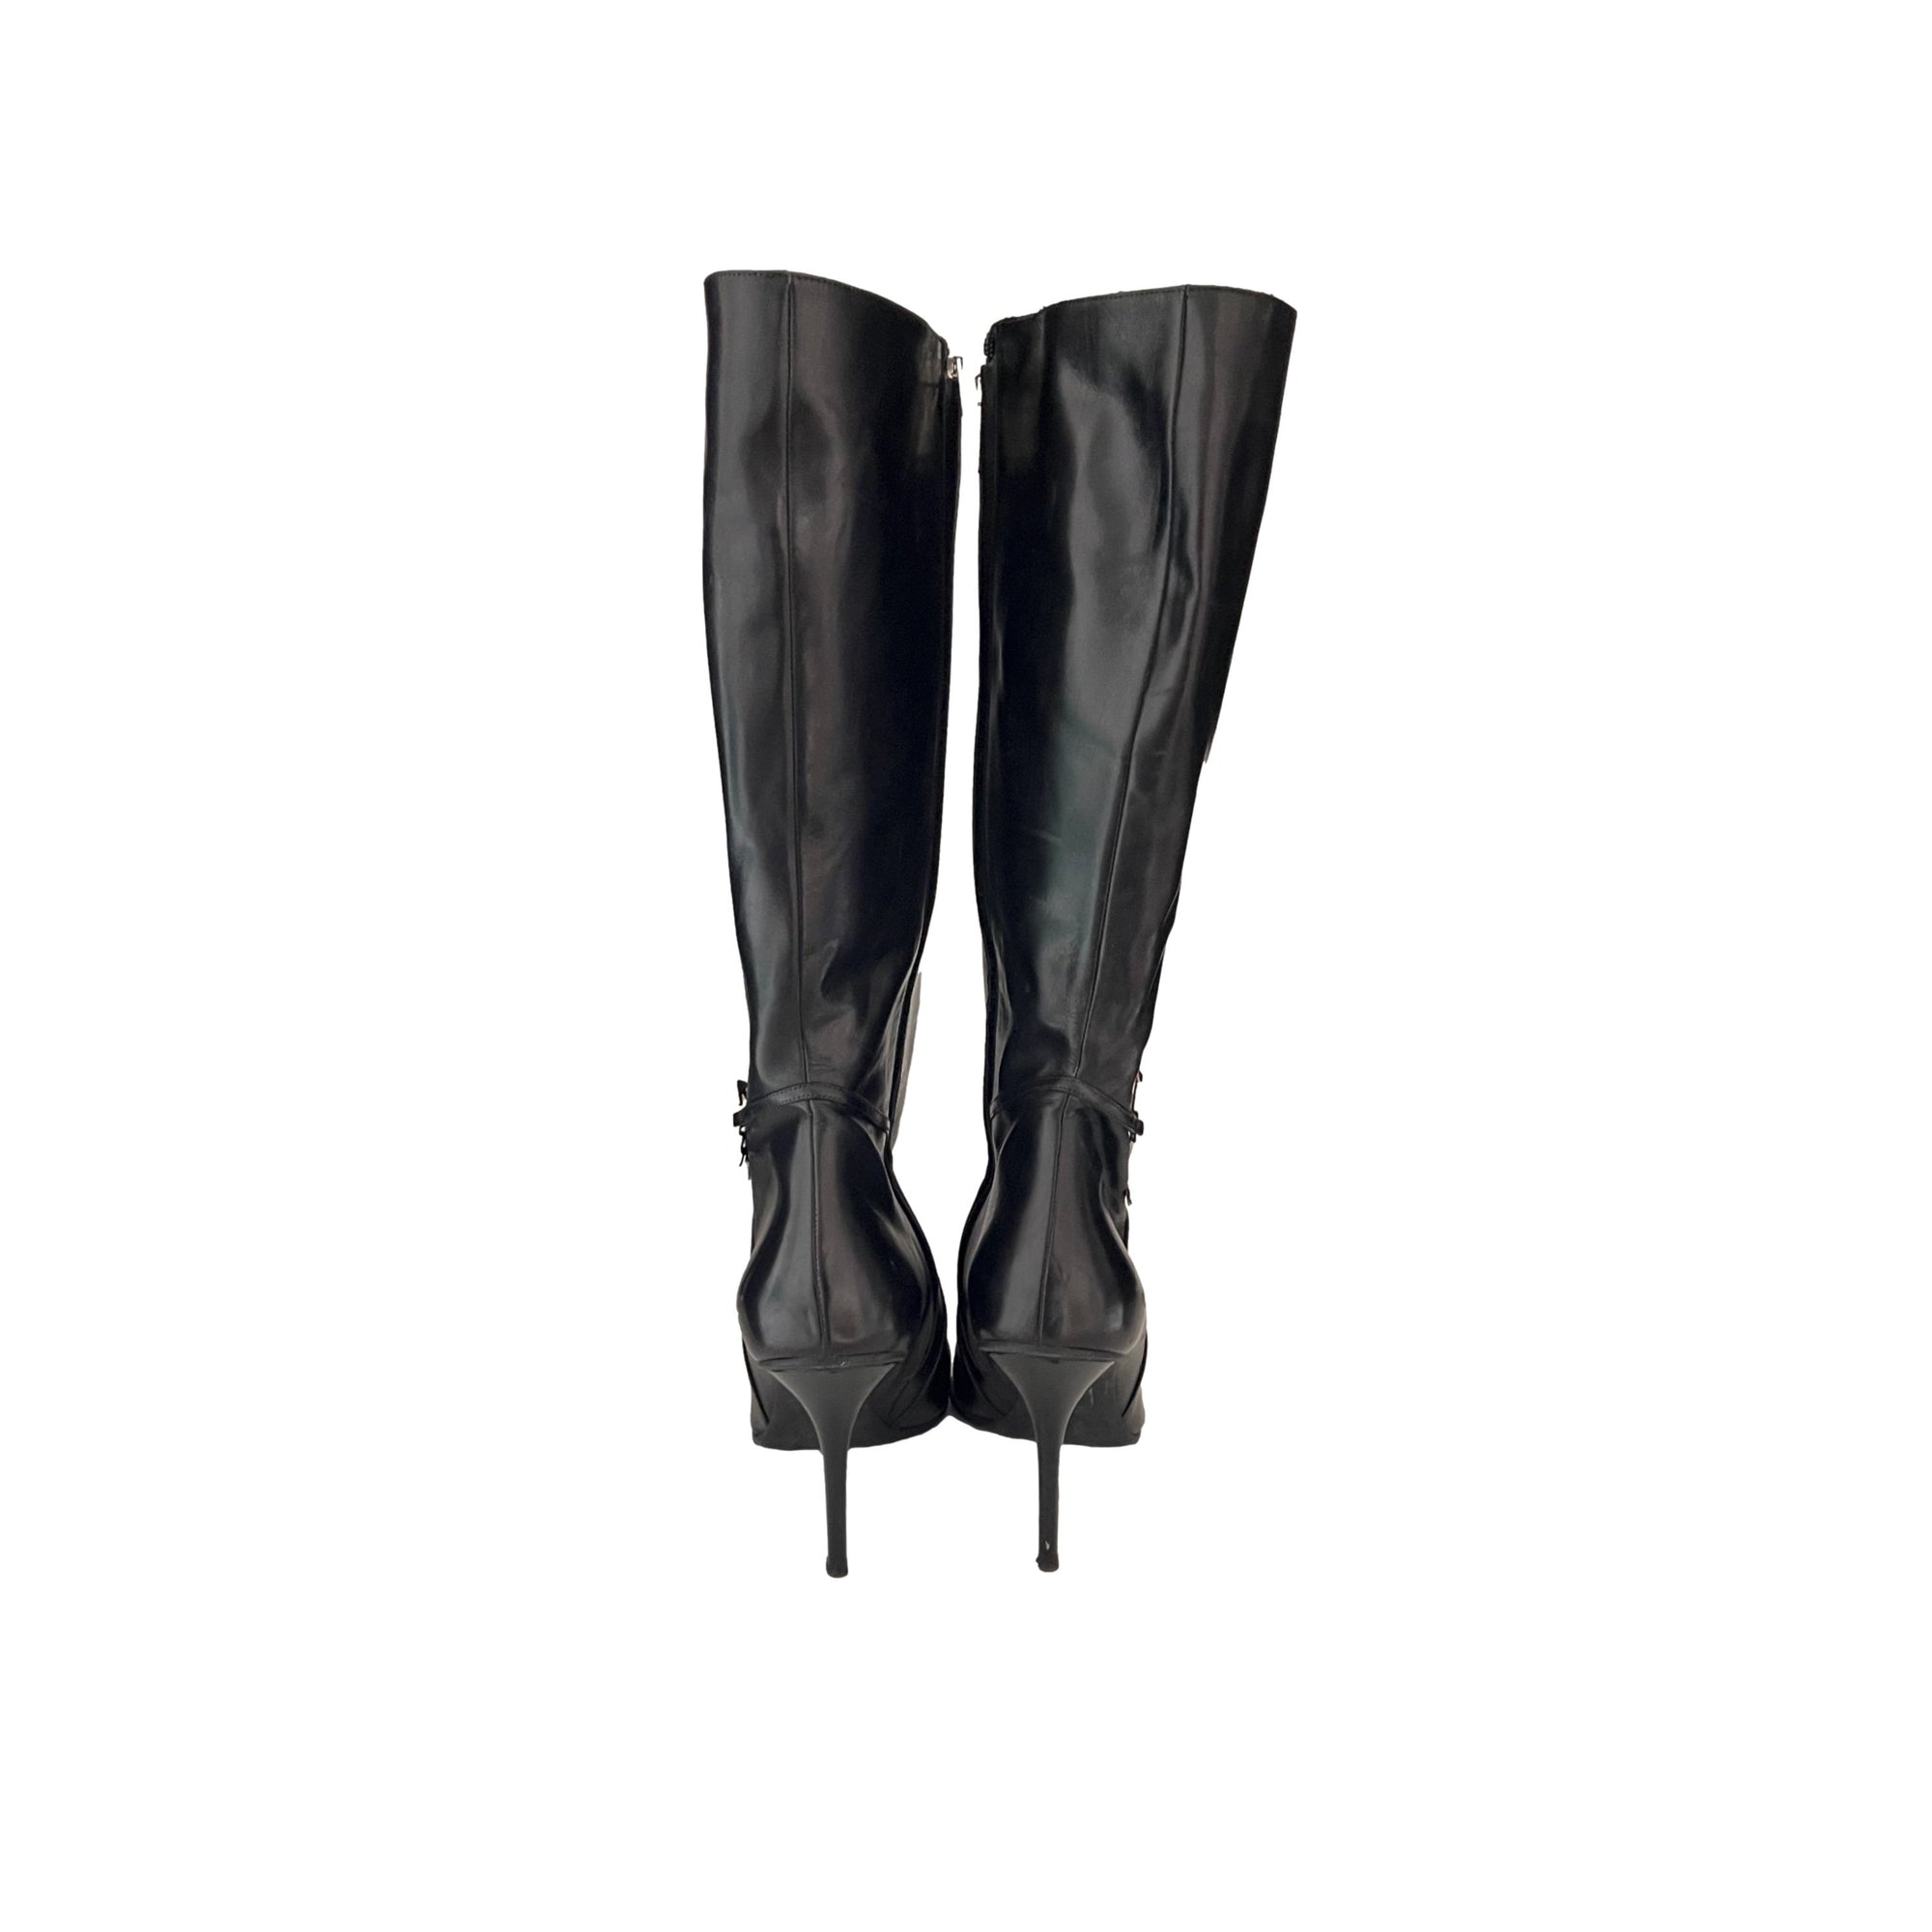 Dior Black Heart Leather Boots - Shoes